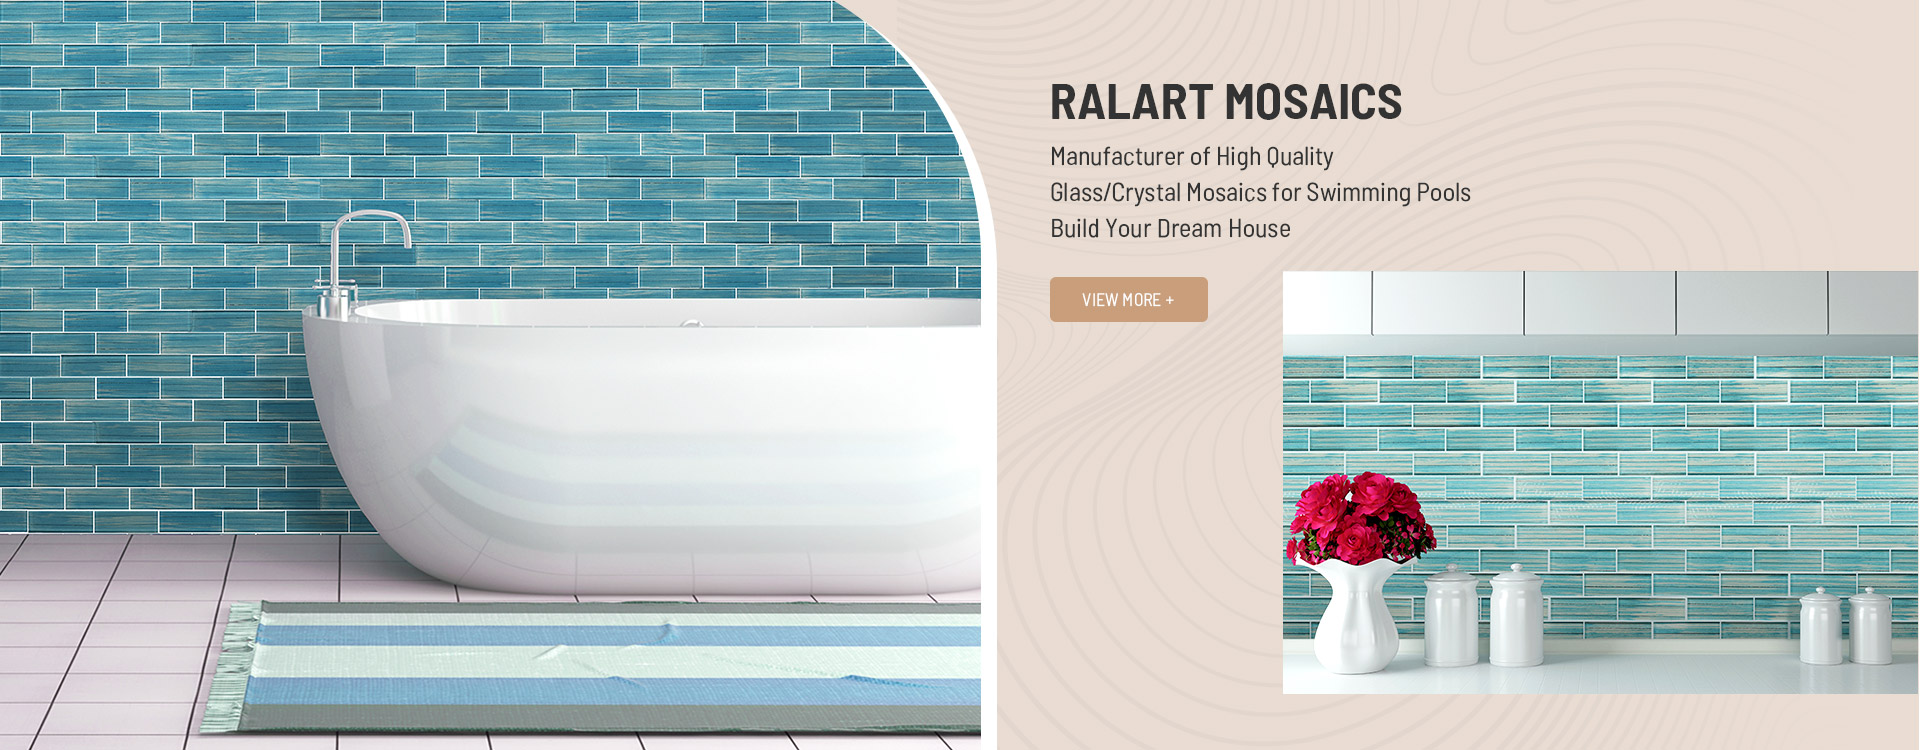 How to choose mosaic tiles according to different